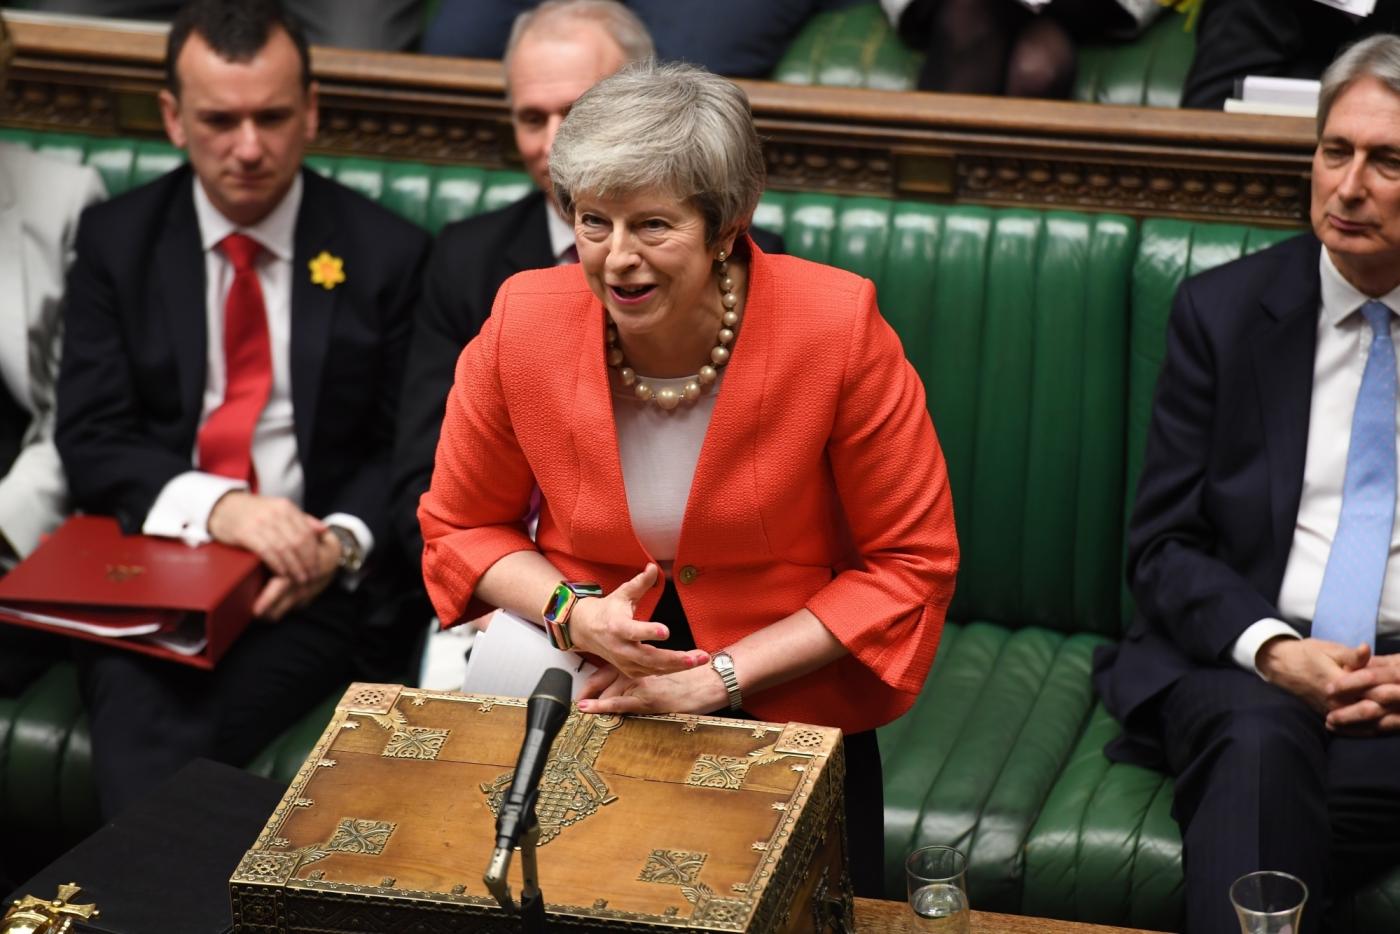 LONDON, Feb. 28, 2019 (Xinhua) -- British Prime Minister Theresa May attends the Prime Minister's Questions in the House of Commons in London, Britain, on Feb. 27, 2019. Theresa May promised on Tuesday that the members of parliament (MPs) would be given a choice to vote on no-deal Brexit or delayed departure from the European Union (EU) if her deal is rejected in a meaningful vote in mid-March. (Xinhua/British Parliament/Jessica Taylor/IANS) by .